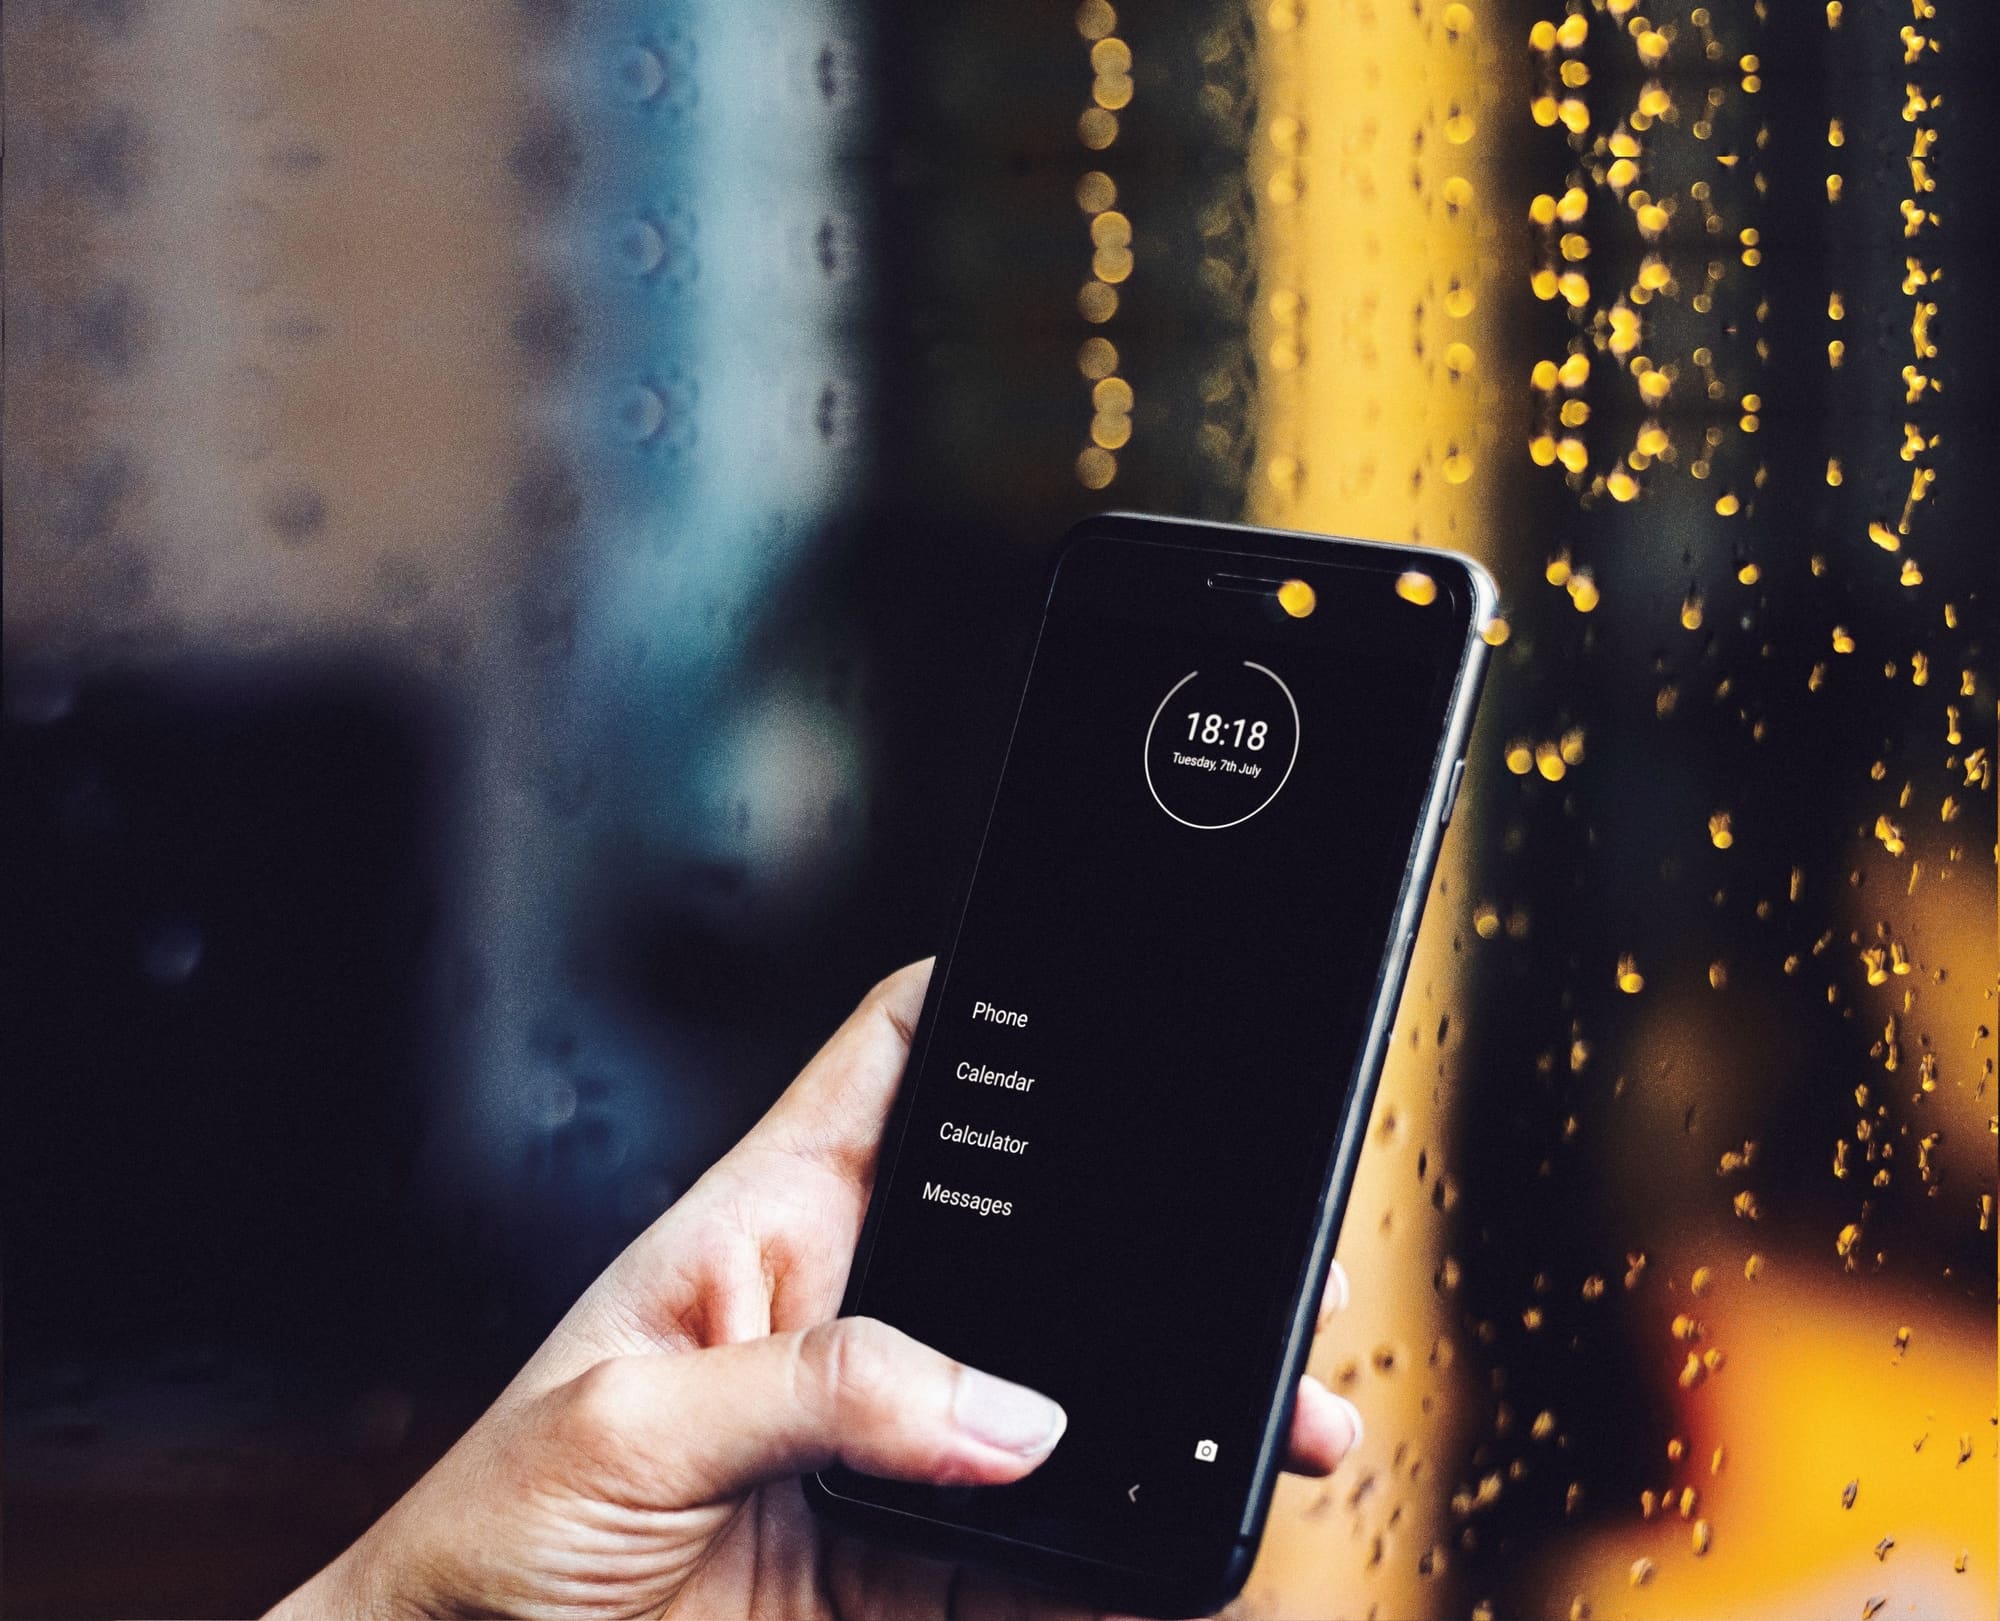 minimal phone launcher on an android phone in front of a rainy window